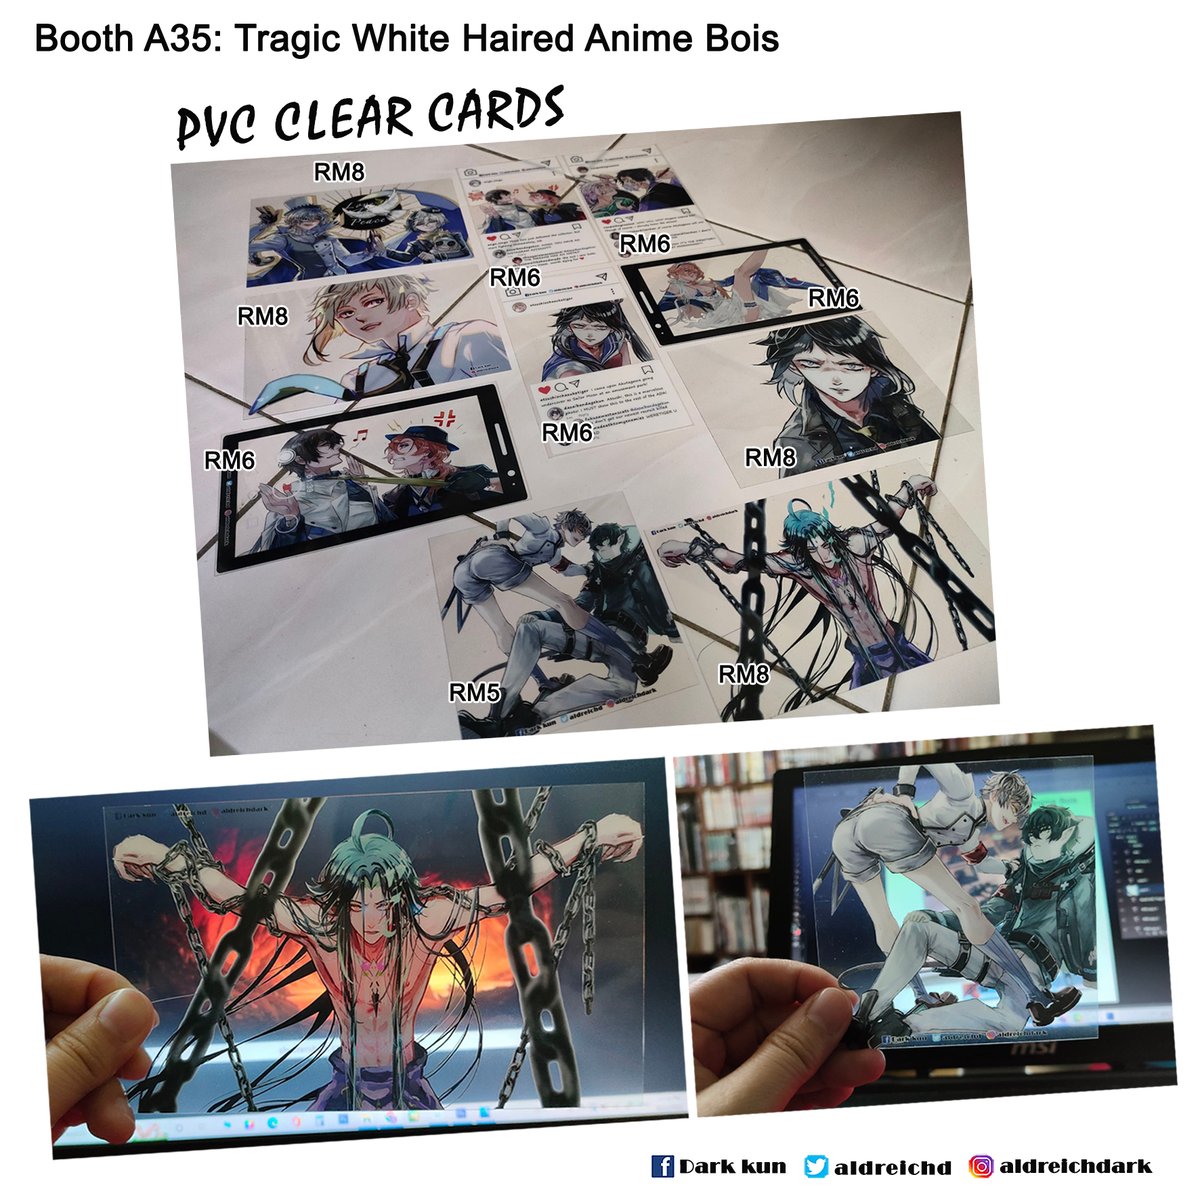 Animangaki catalogue Part 3/7

I haven't drawn chibi is ages, so those candy wrapper keychains...they are rare yeap w

Retweets are most welcome~thanks!

#animangaki2022 #amg2022 #genshinimpact #genshin #原神 #zhongchi 